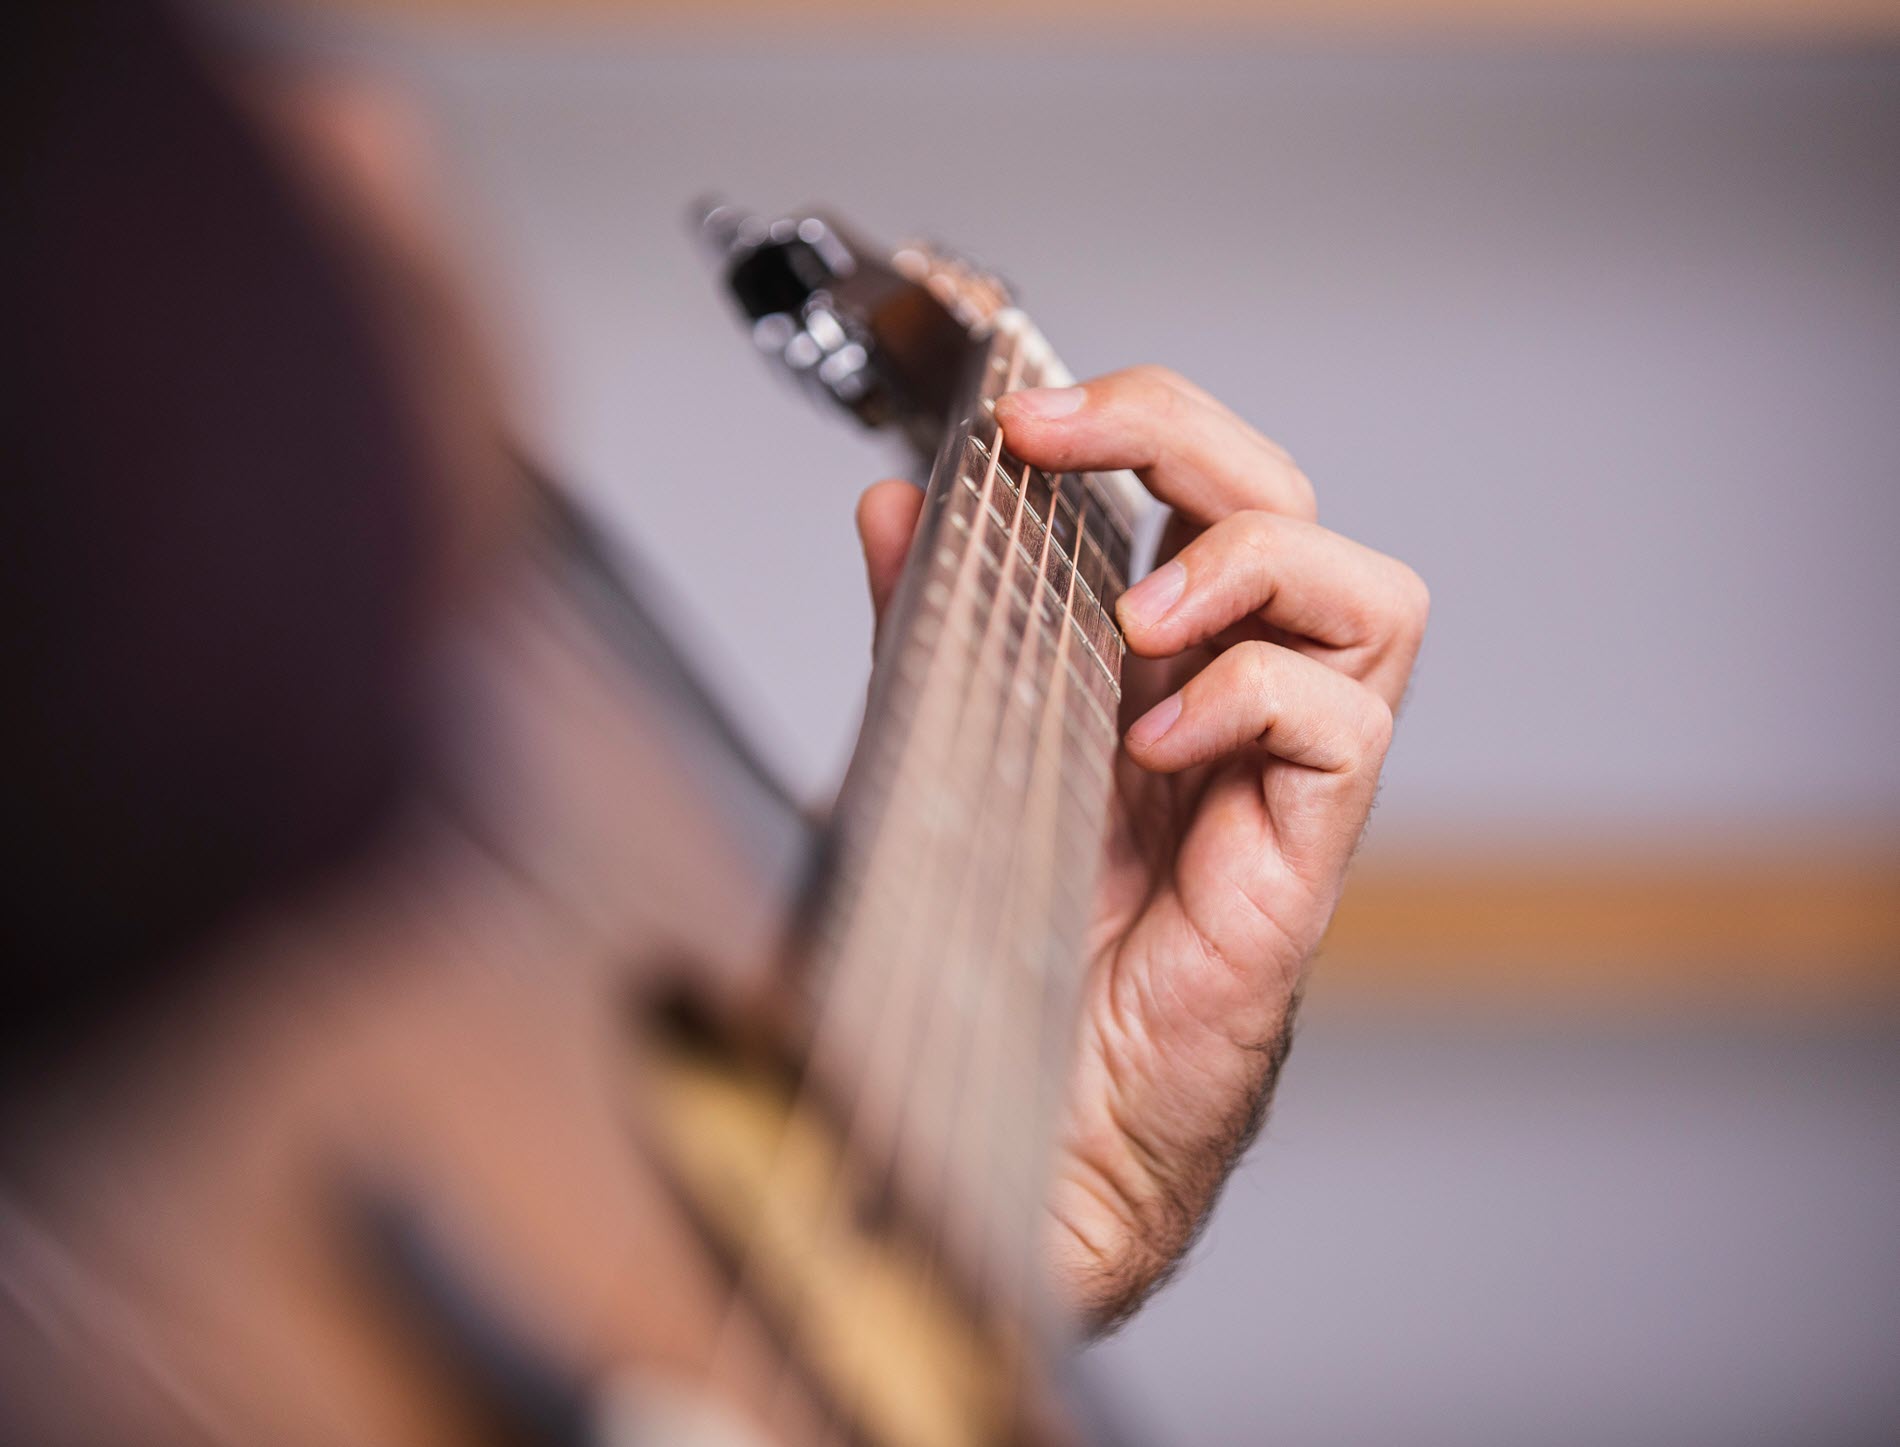 Closeup from side angle of someone playing an acoustic guitar with focus on hand placement on neck of guitar.